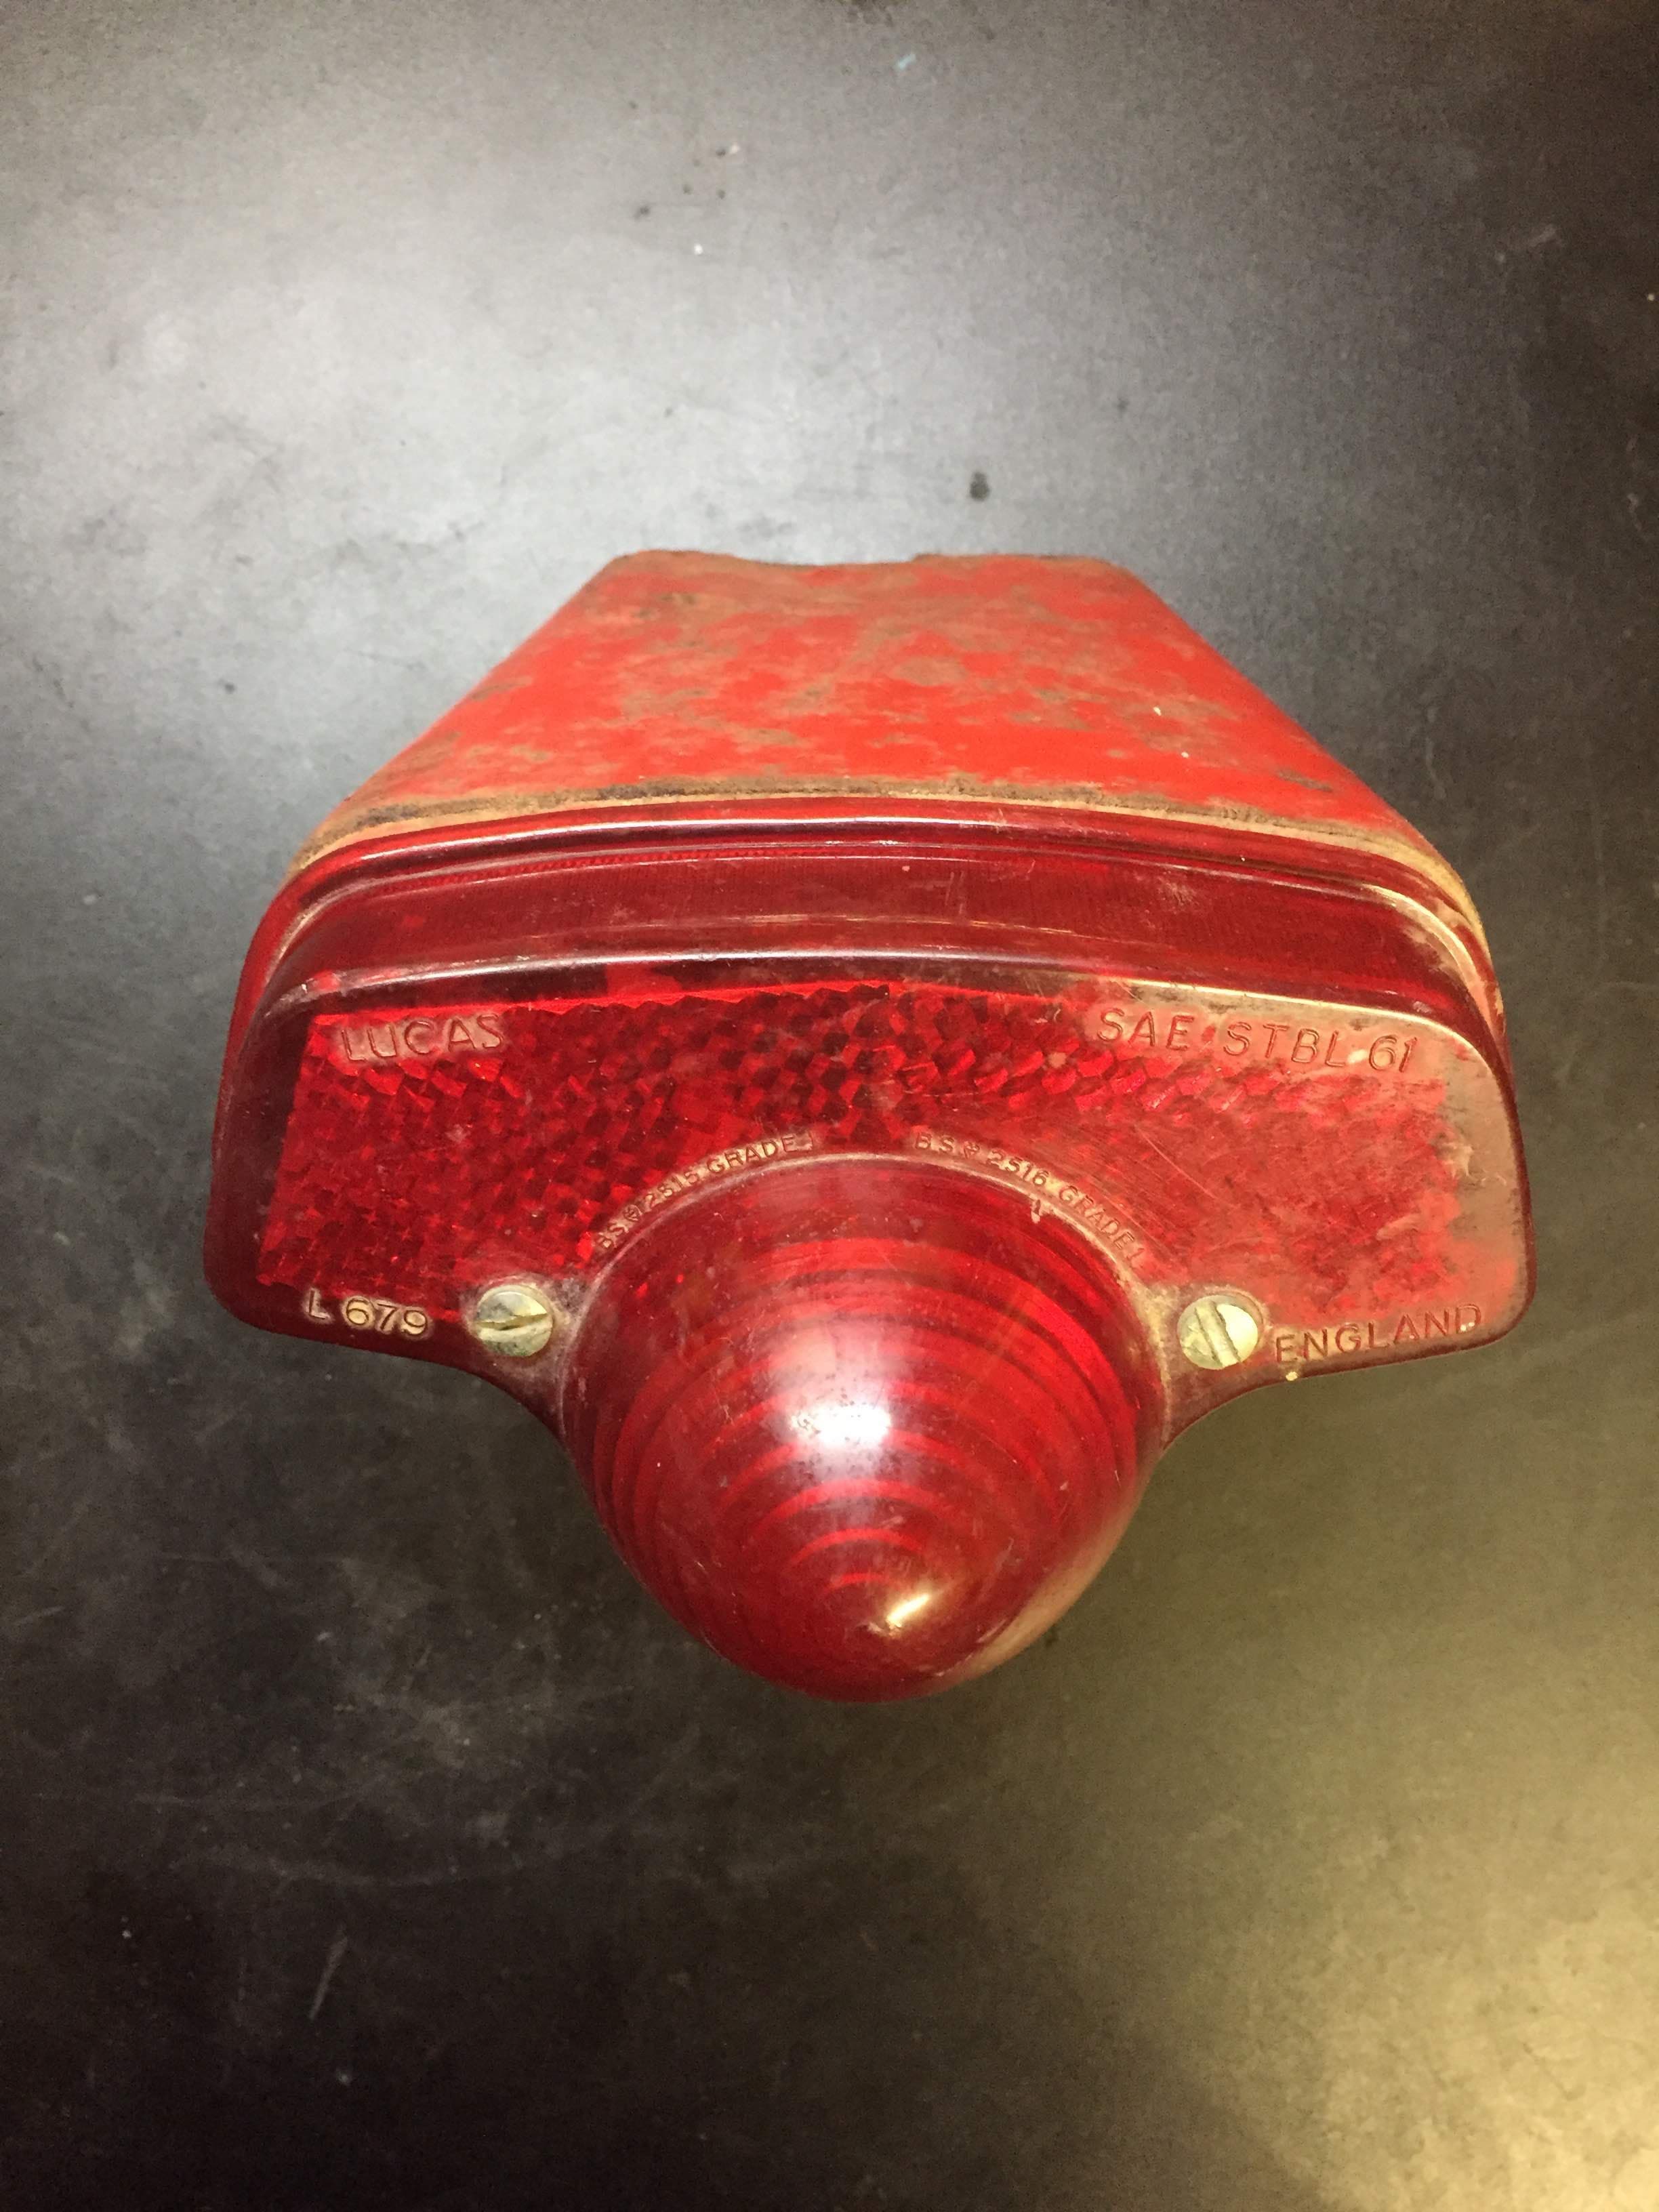 364.2.55.815.2 Allstate Compact Puch Taillight